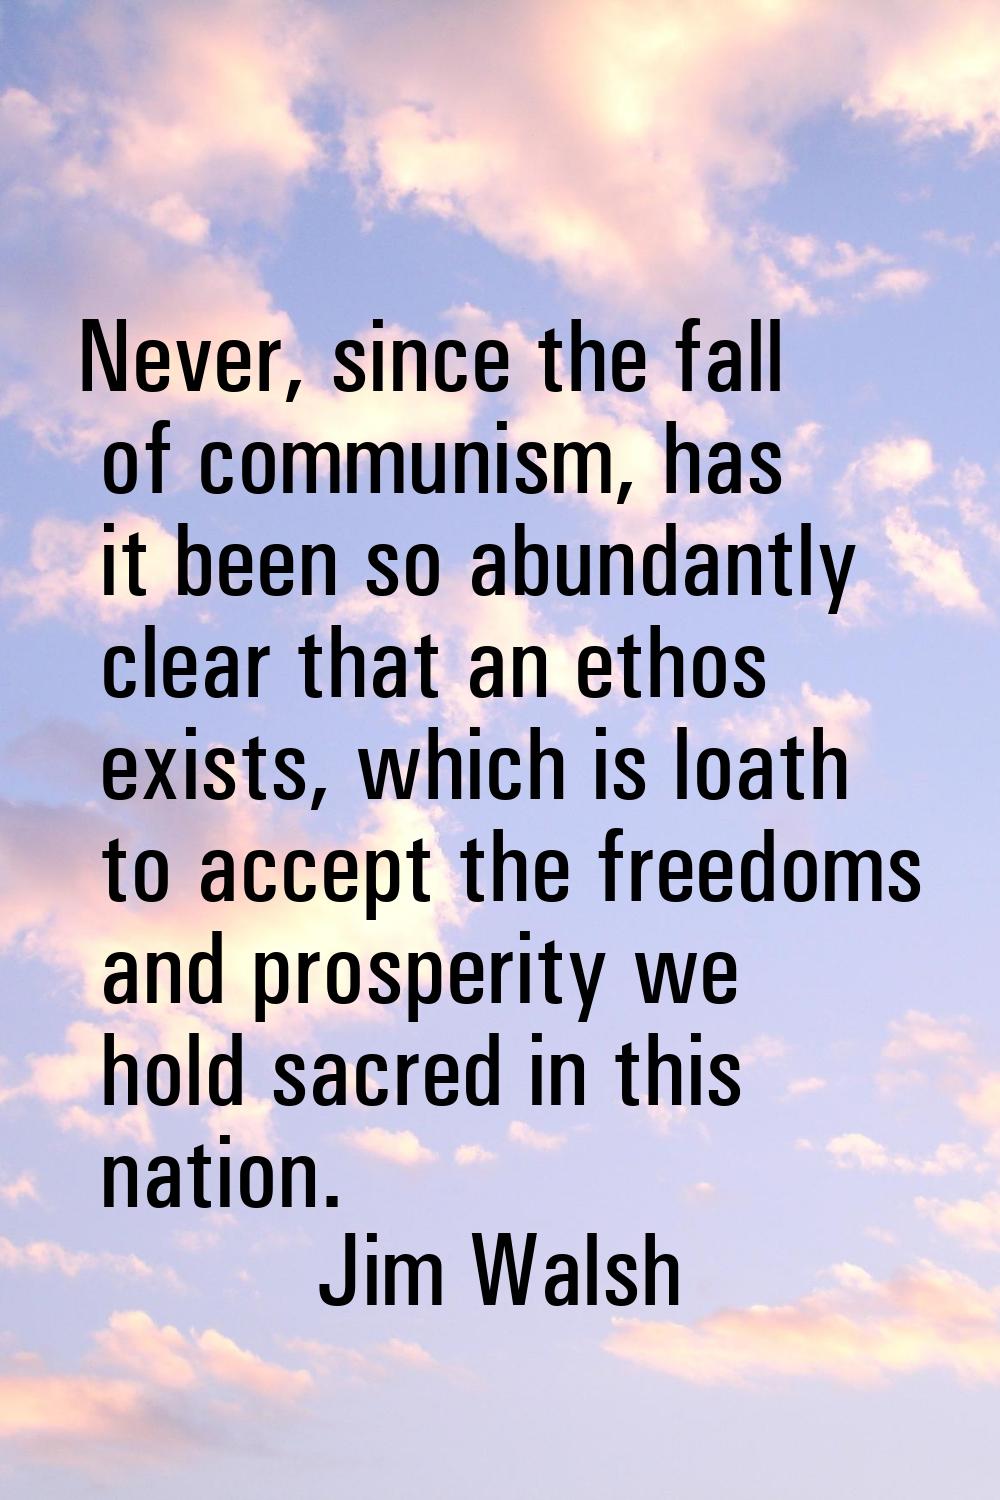 Never, since the fall of communism, has it been so abundantly clear that an ethos exists, which is 